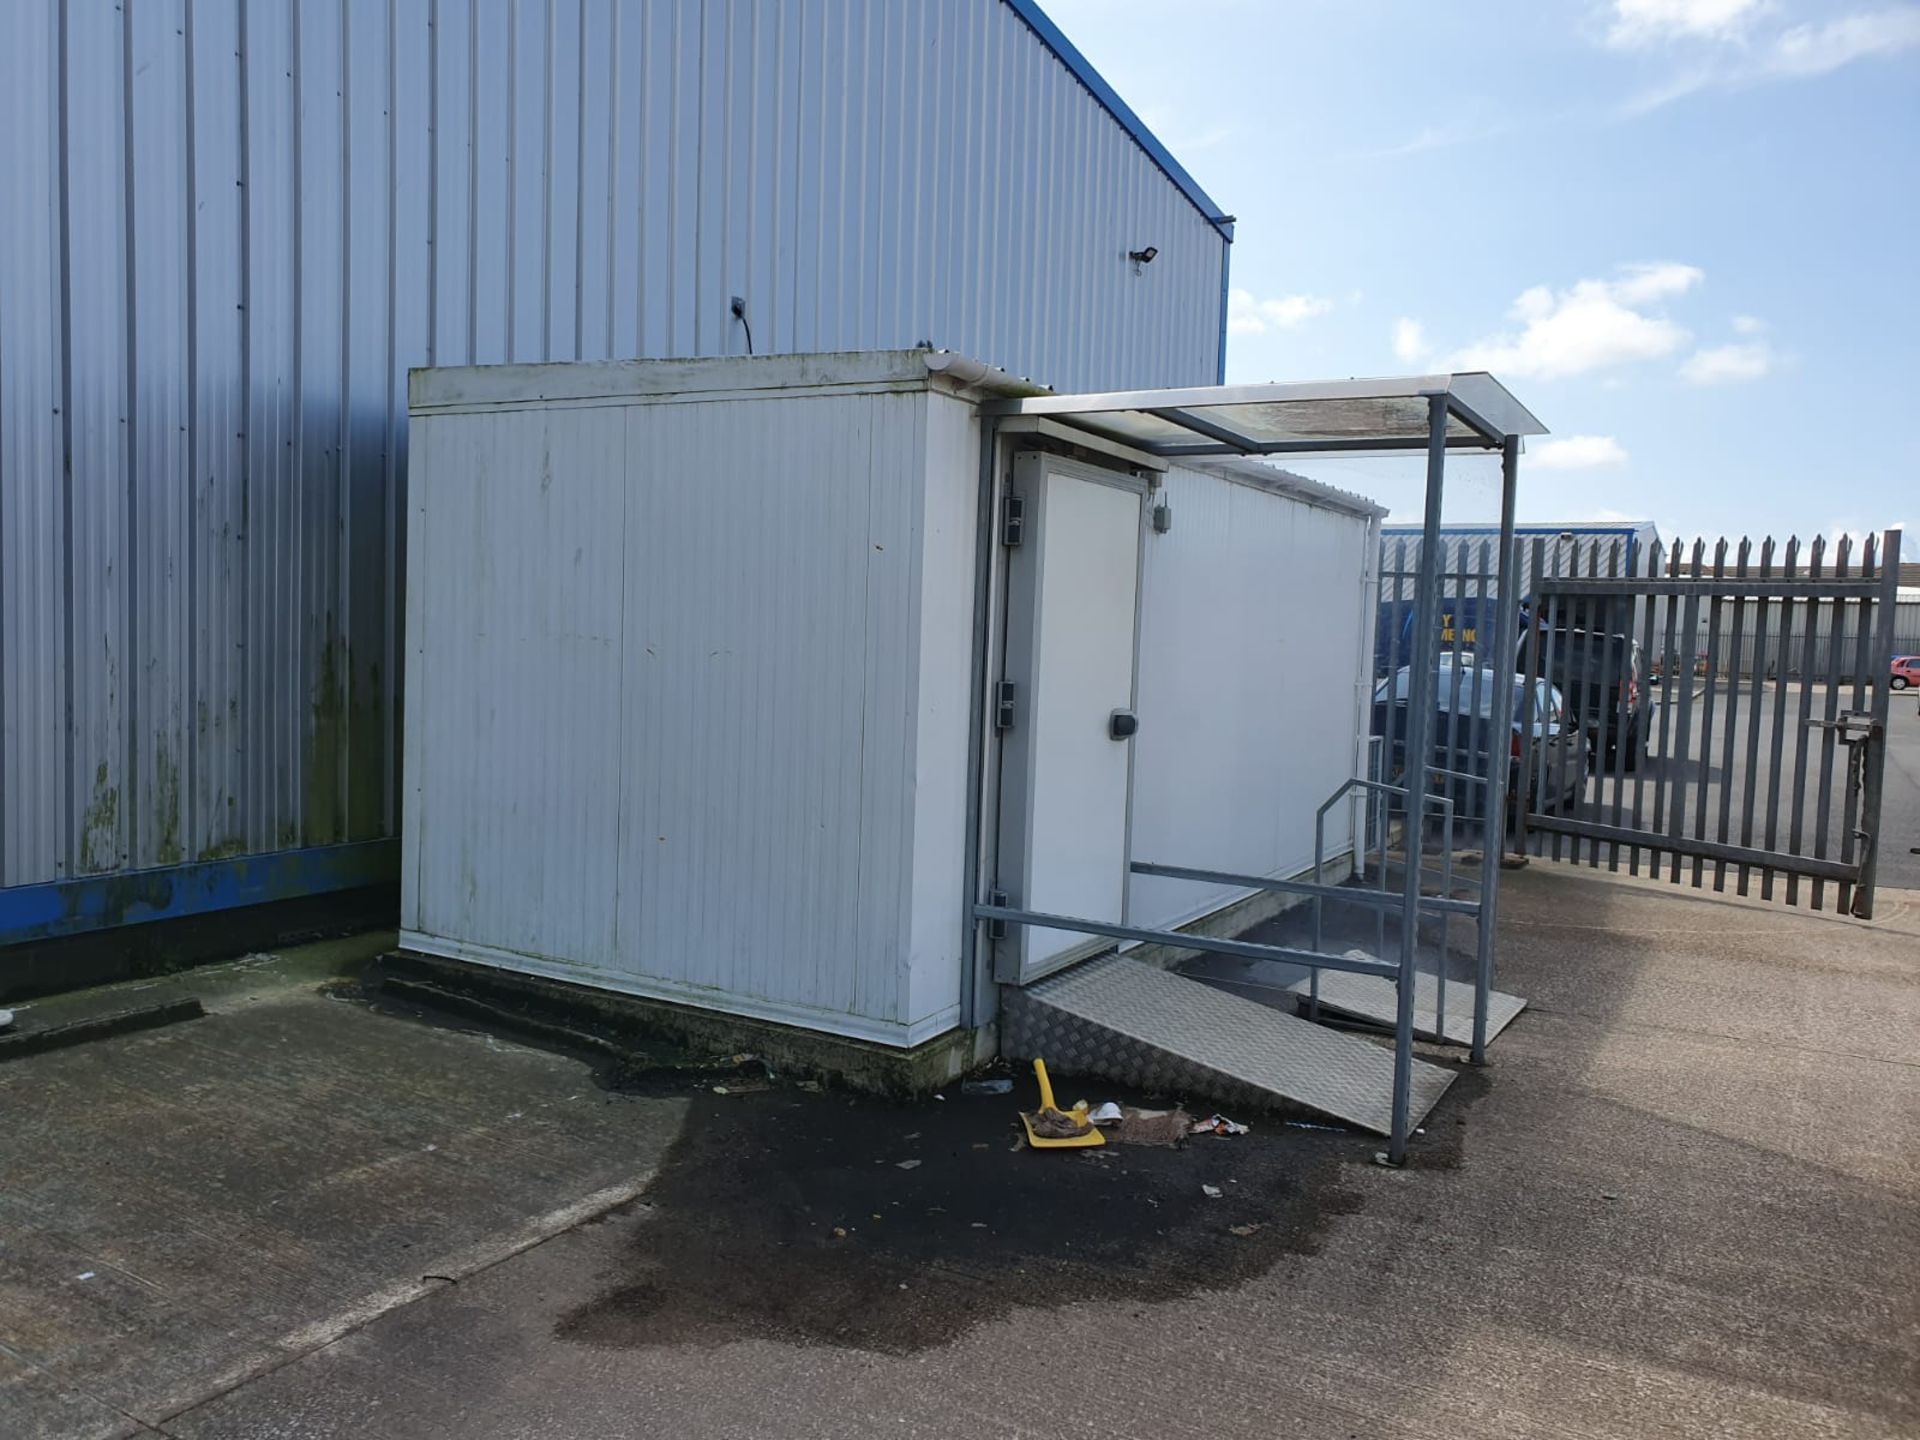 1 x External Refrigerated Cold Room Unit - Features Entrance Ramp With Overhead Canopy, Internal - Image 10 of 11